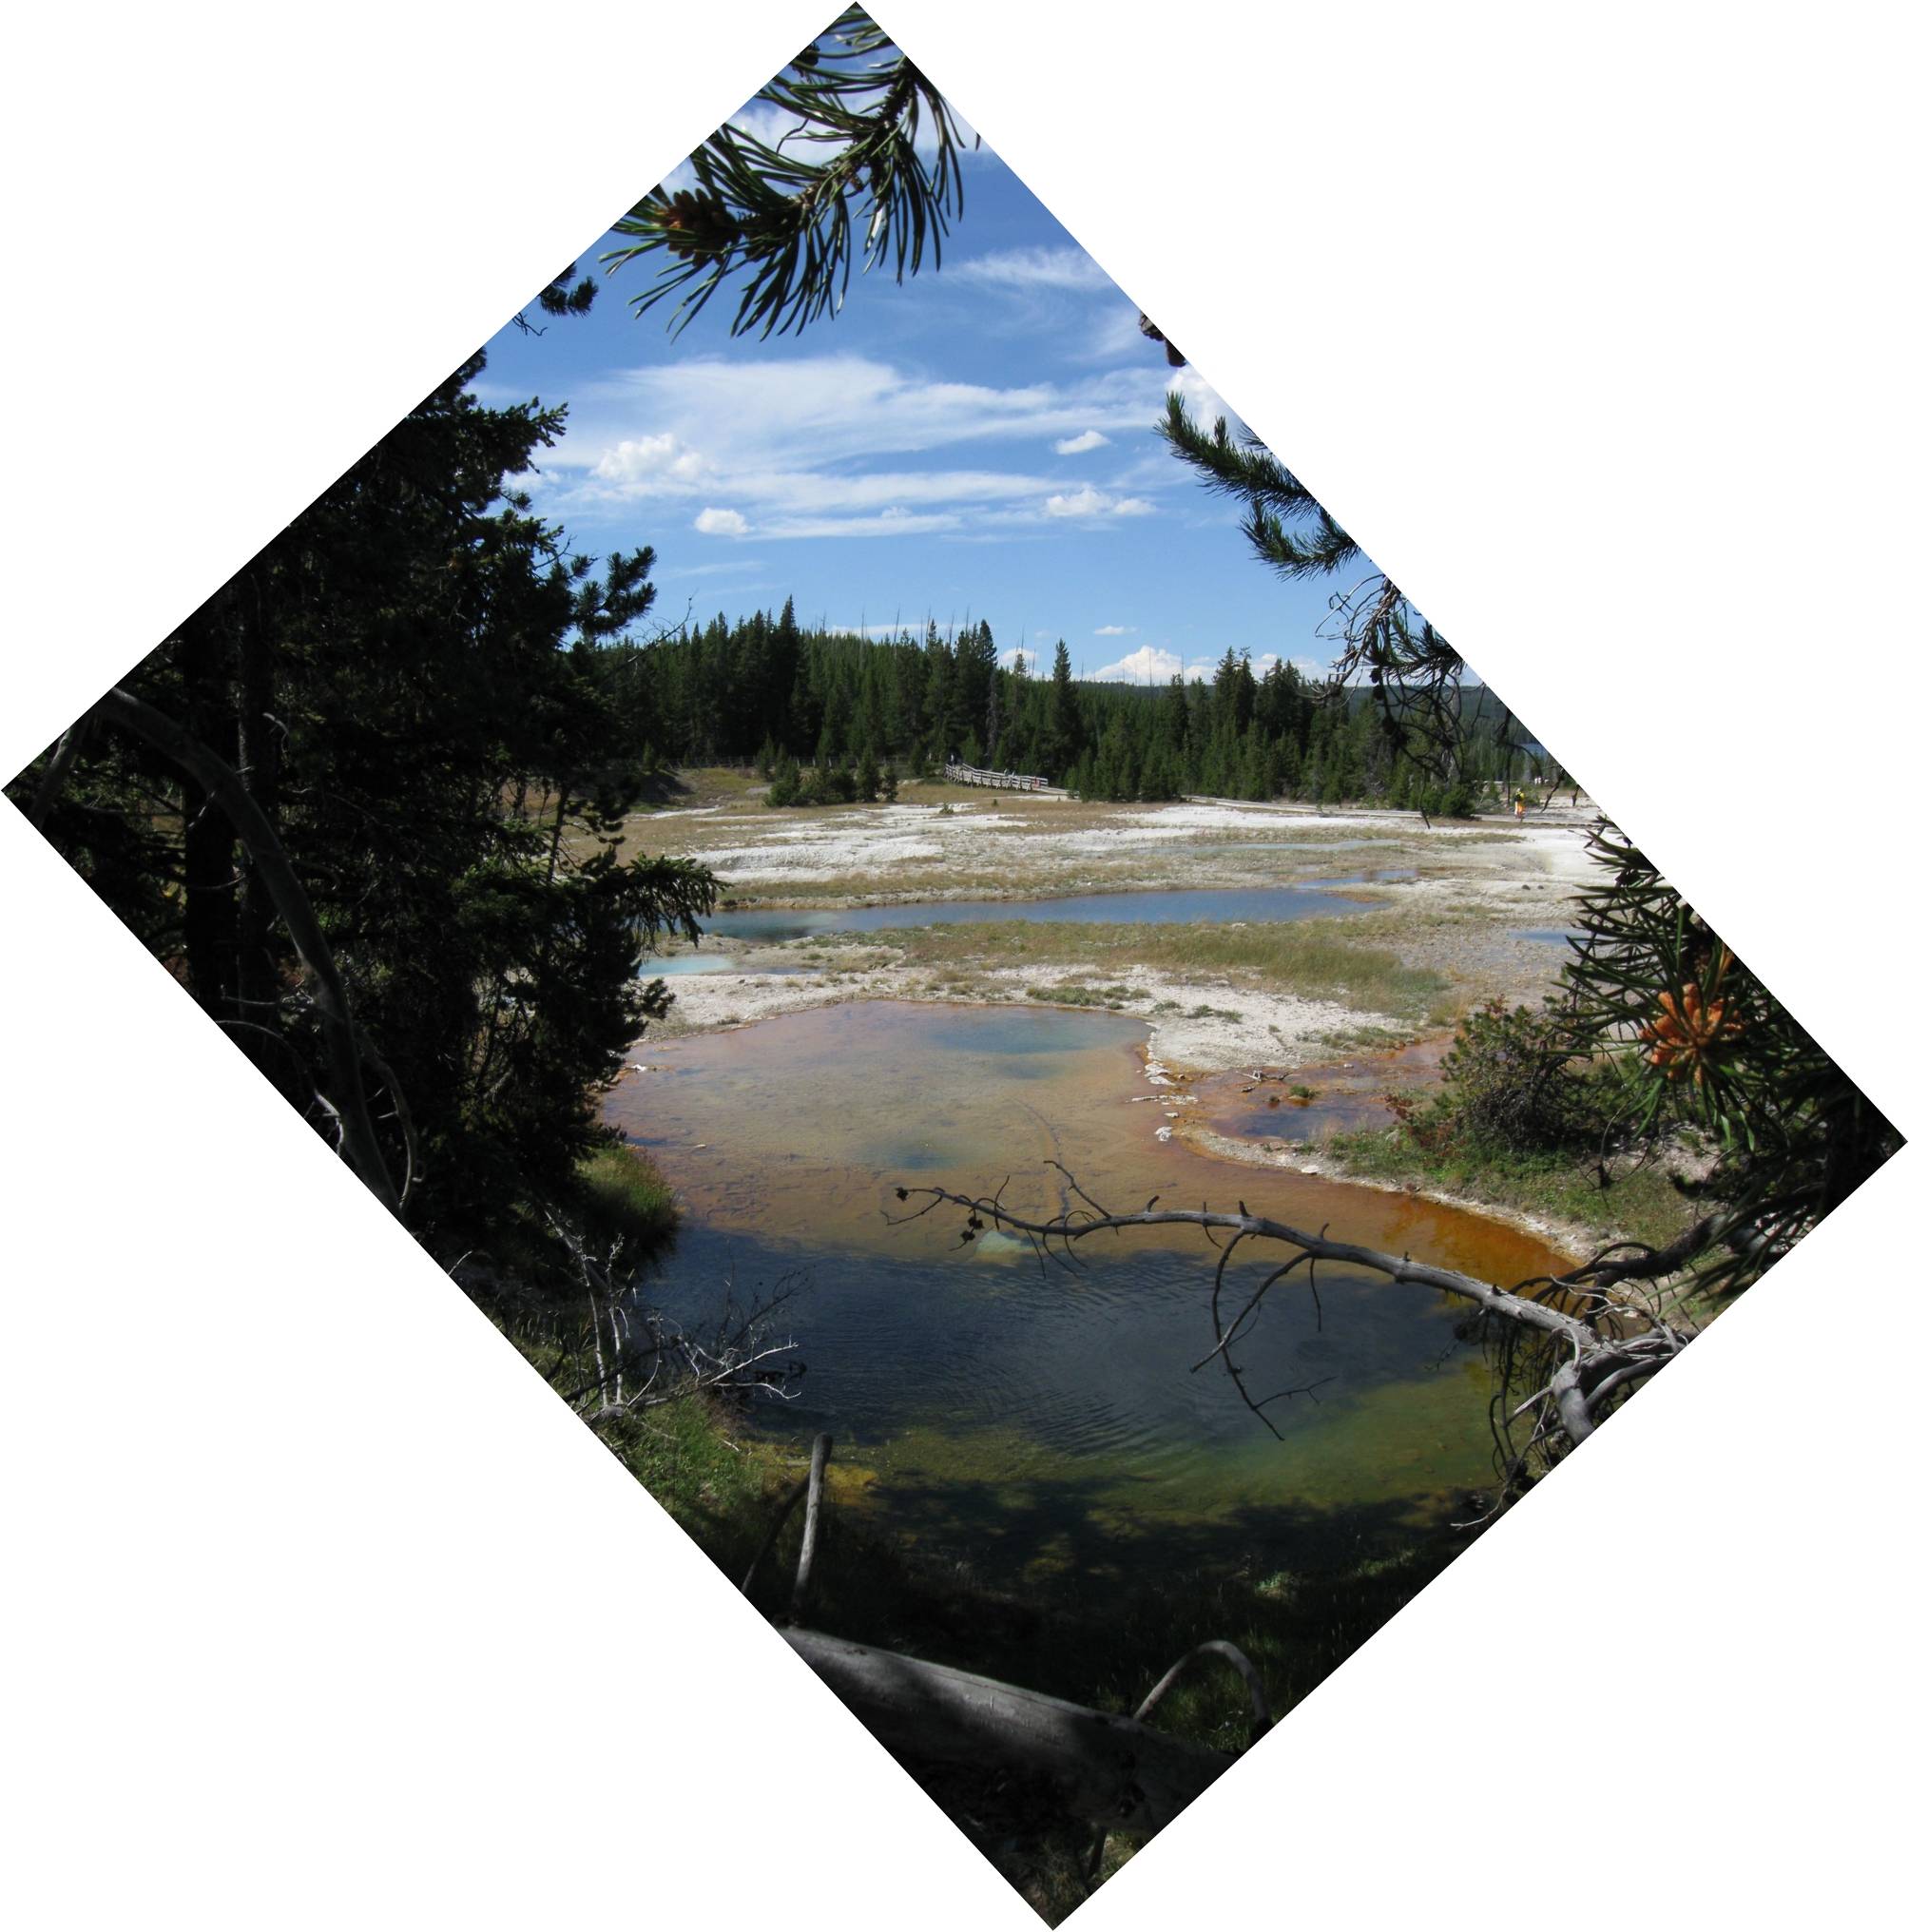 Image: A view of the West Thumb Geyser Basin